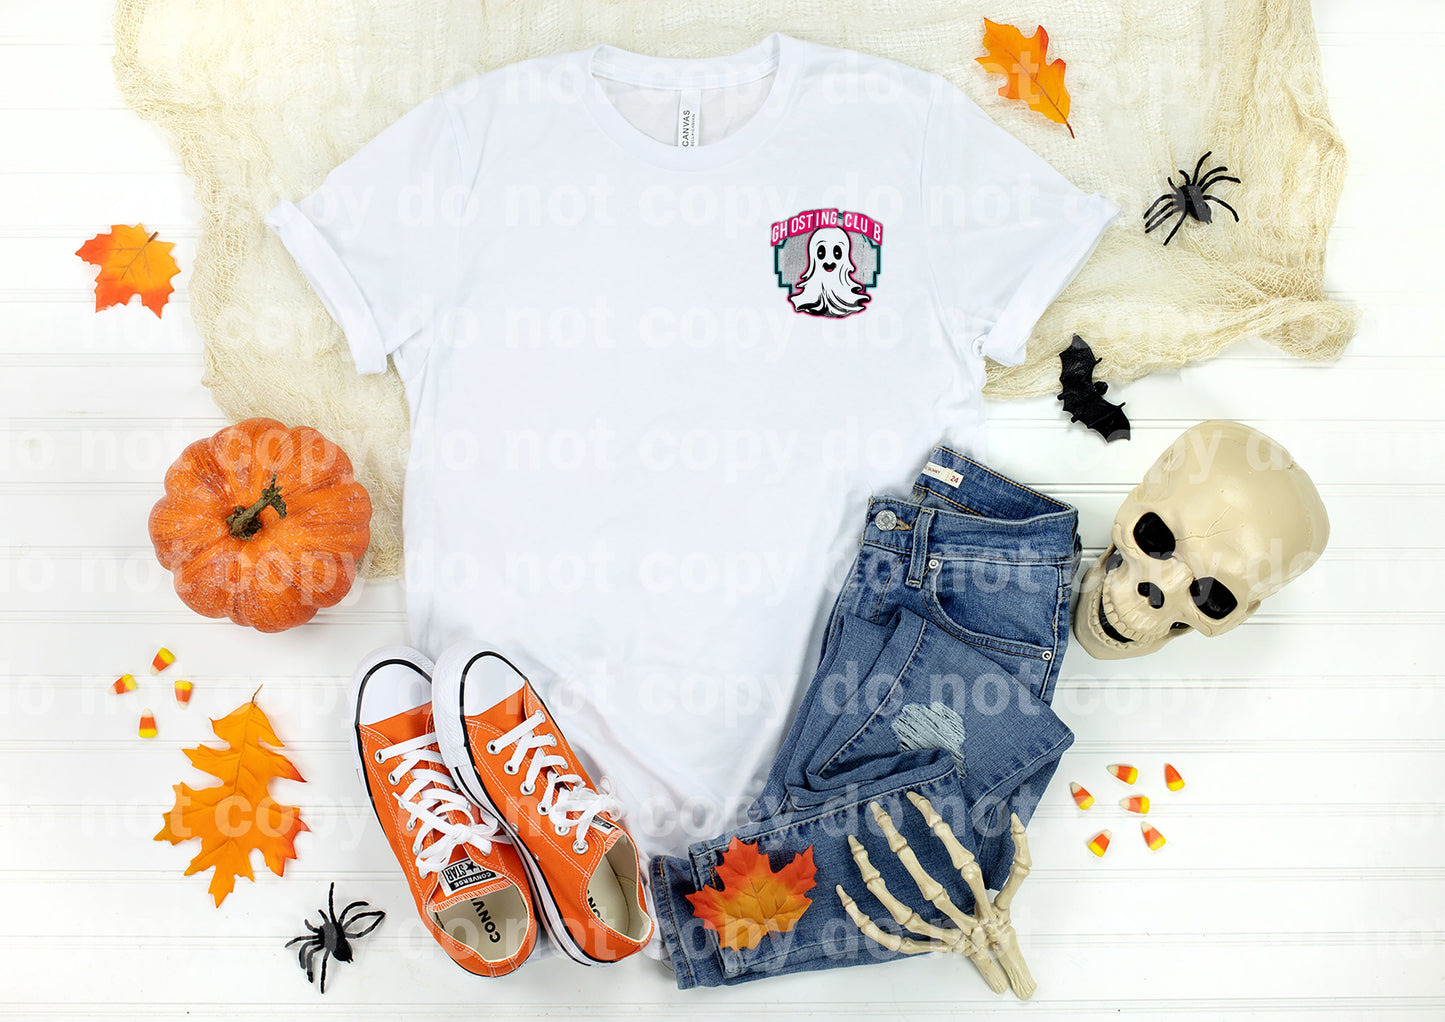 Ghost O Ween with Pocket Option Dream Print or Sublimation Print